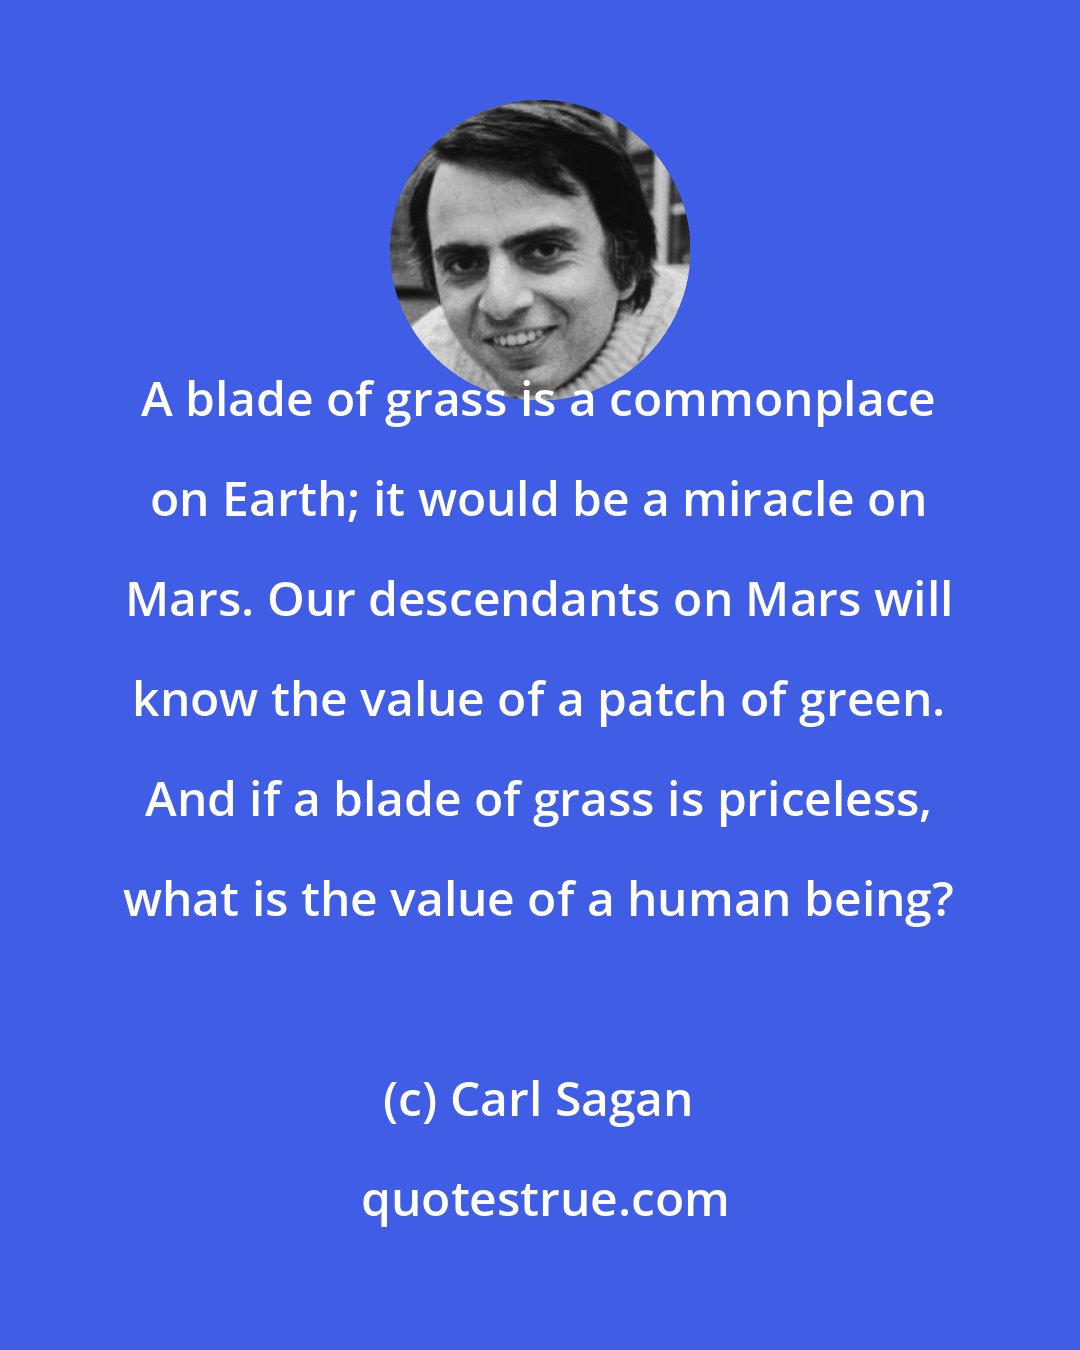 Carl Sagan: A blade of grass is a commonplace on Earth; it would be a miracle on Mars. Our descendants on Mars will know the value of a patch of green. And if a blade of grass is priceless, what is the value of a human being?